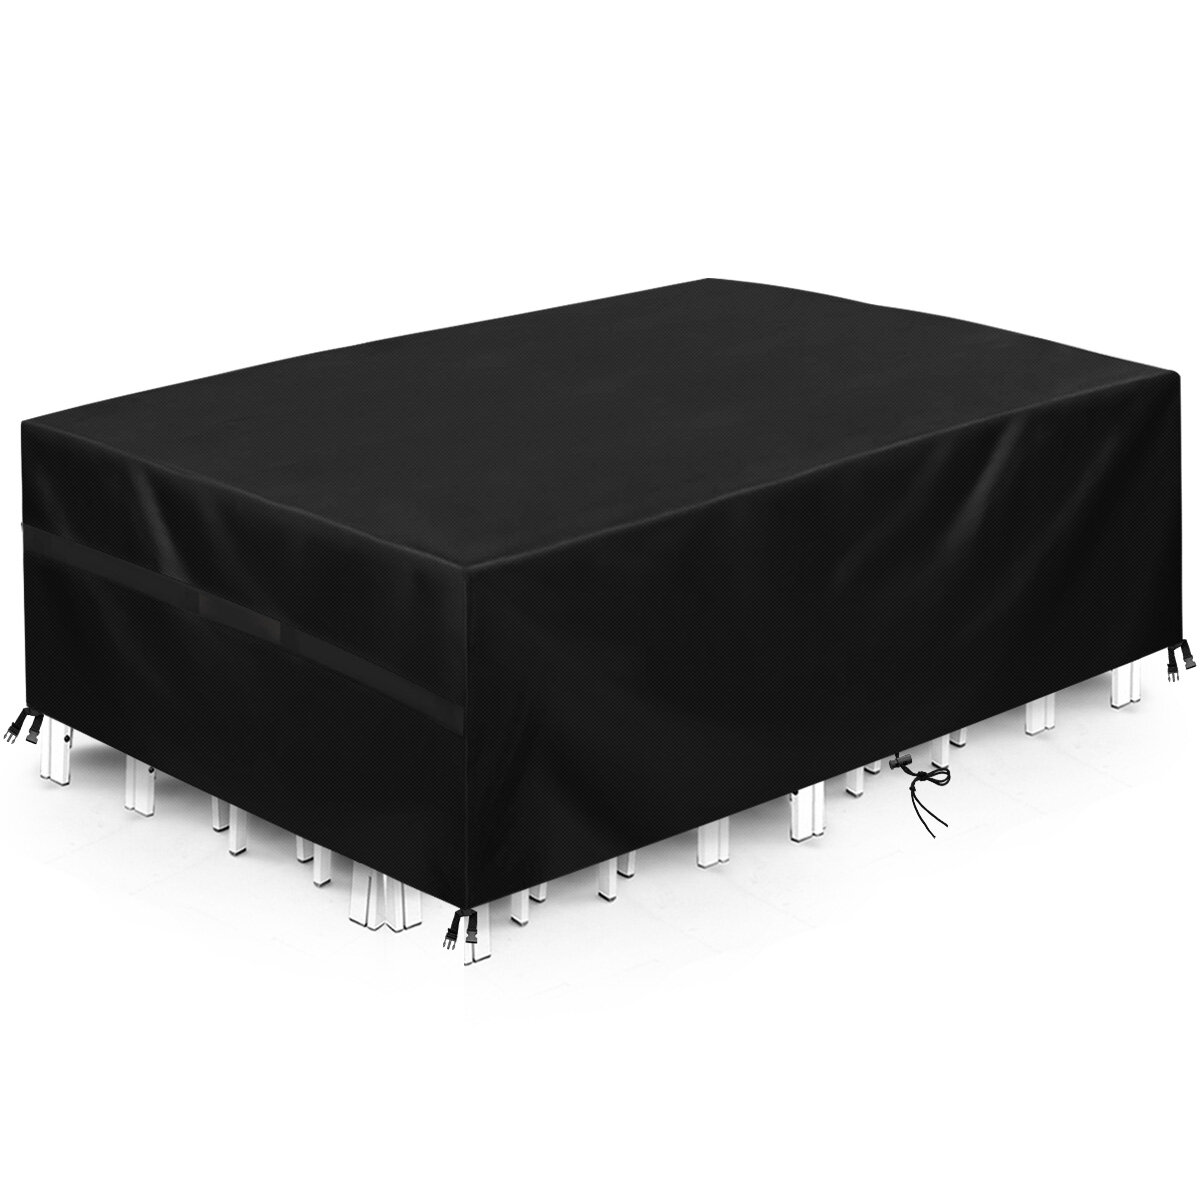 

KING DO WAY 242x182x100CM 600D Protective Cover Furniture Cover Waterproof Durable Outdoor Household Table Protection La